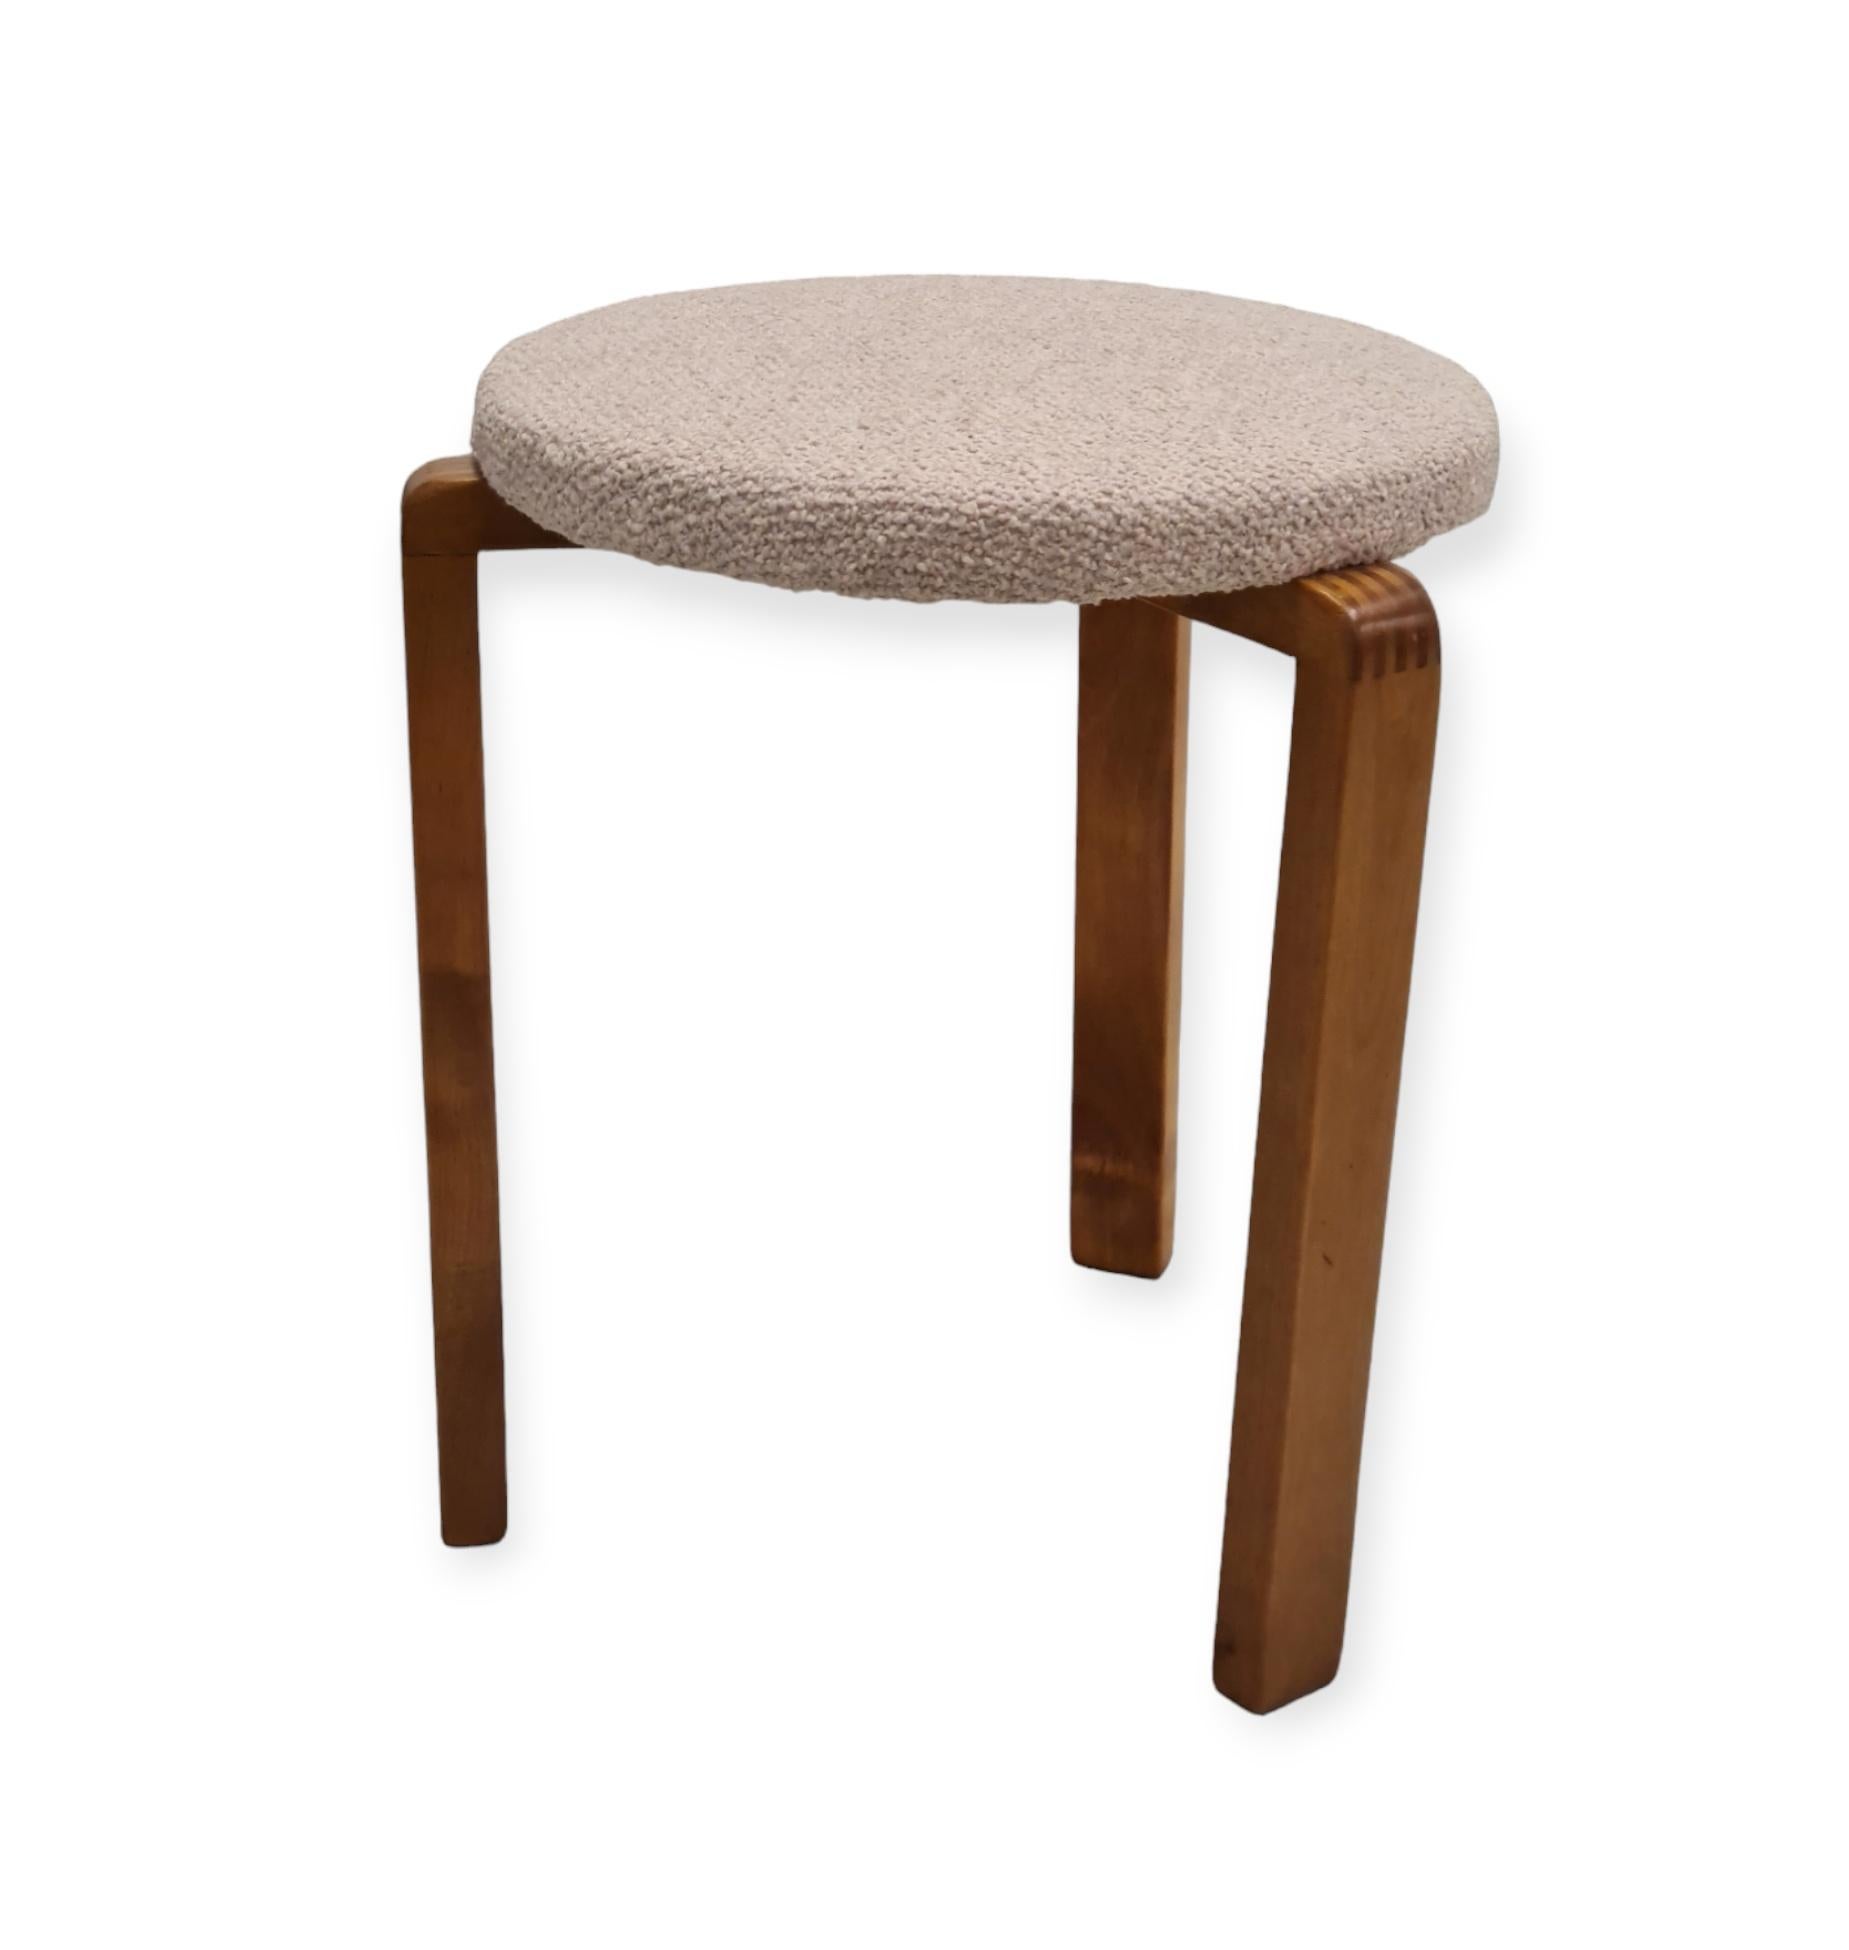 Alvar Aalto war-time stools are extremely sought after collectibles for the simple reason that not many of them are available any more.
A war-time stool can be easily distinguished by the way the legs are bent, or actually in this case joint